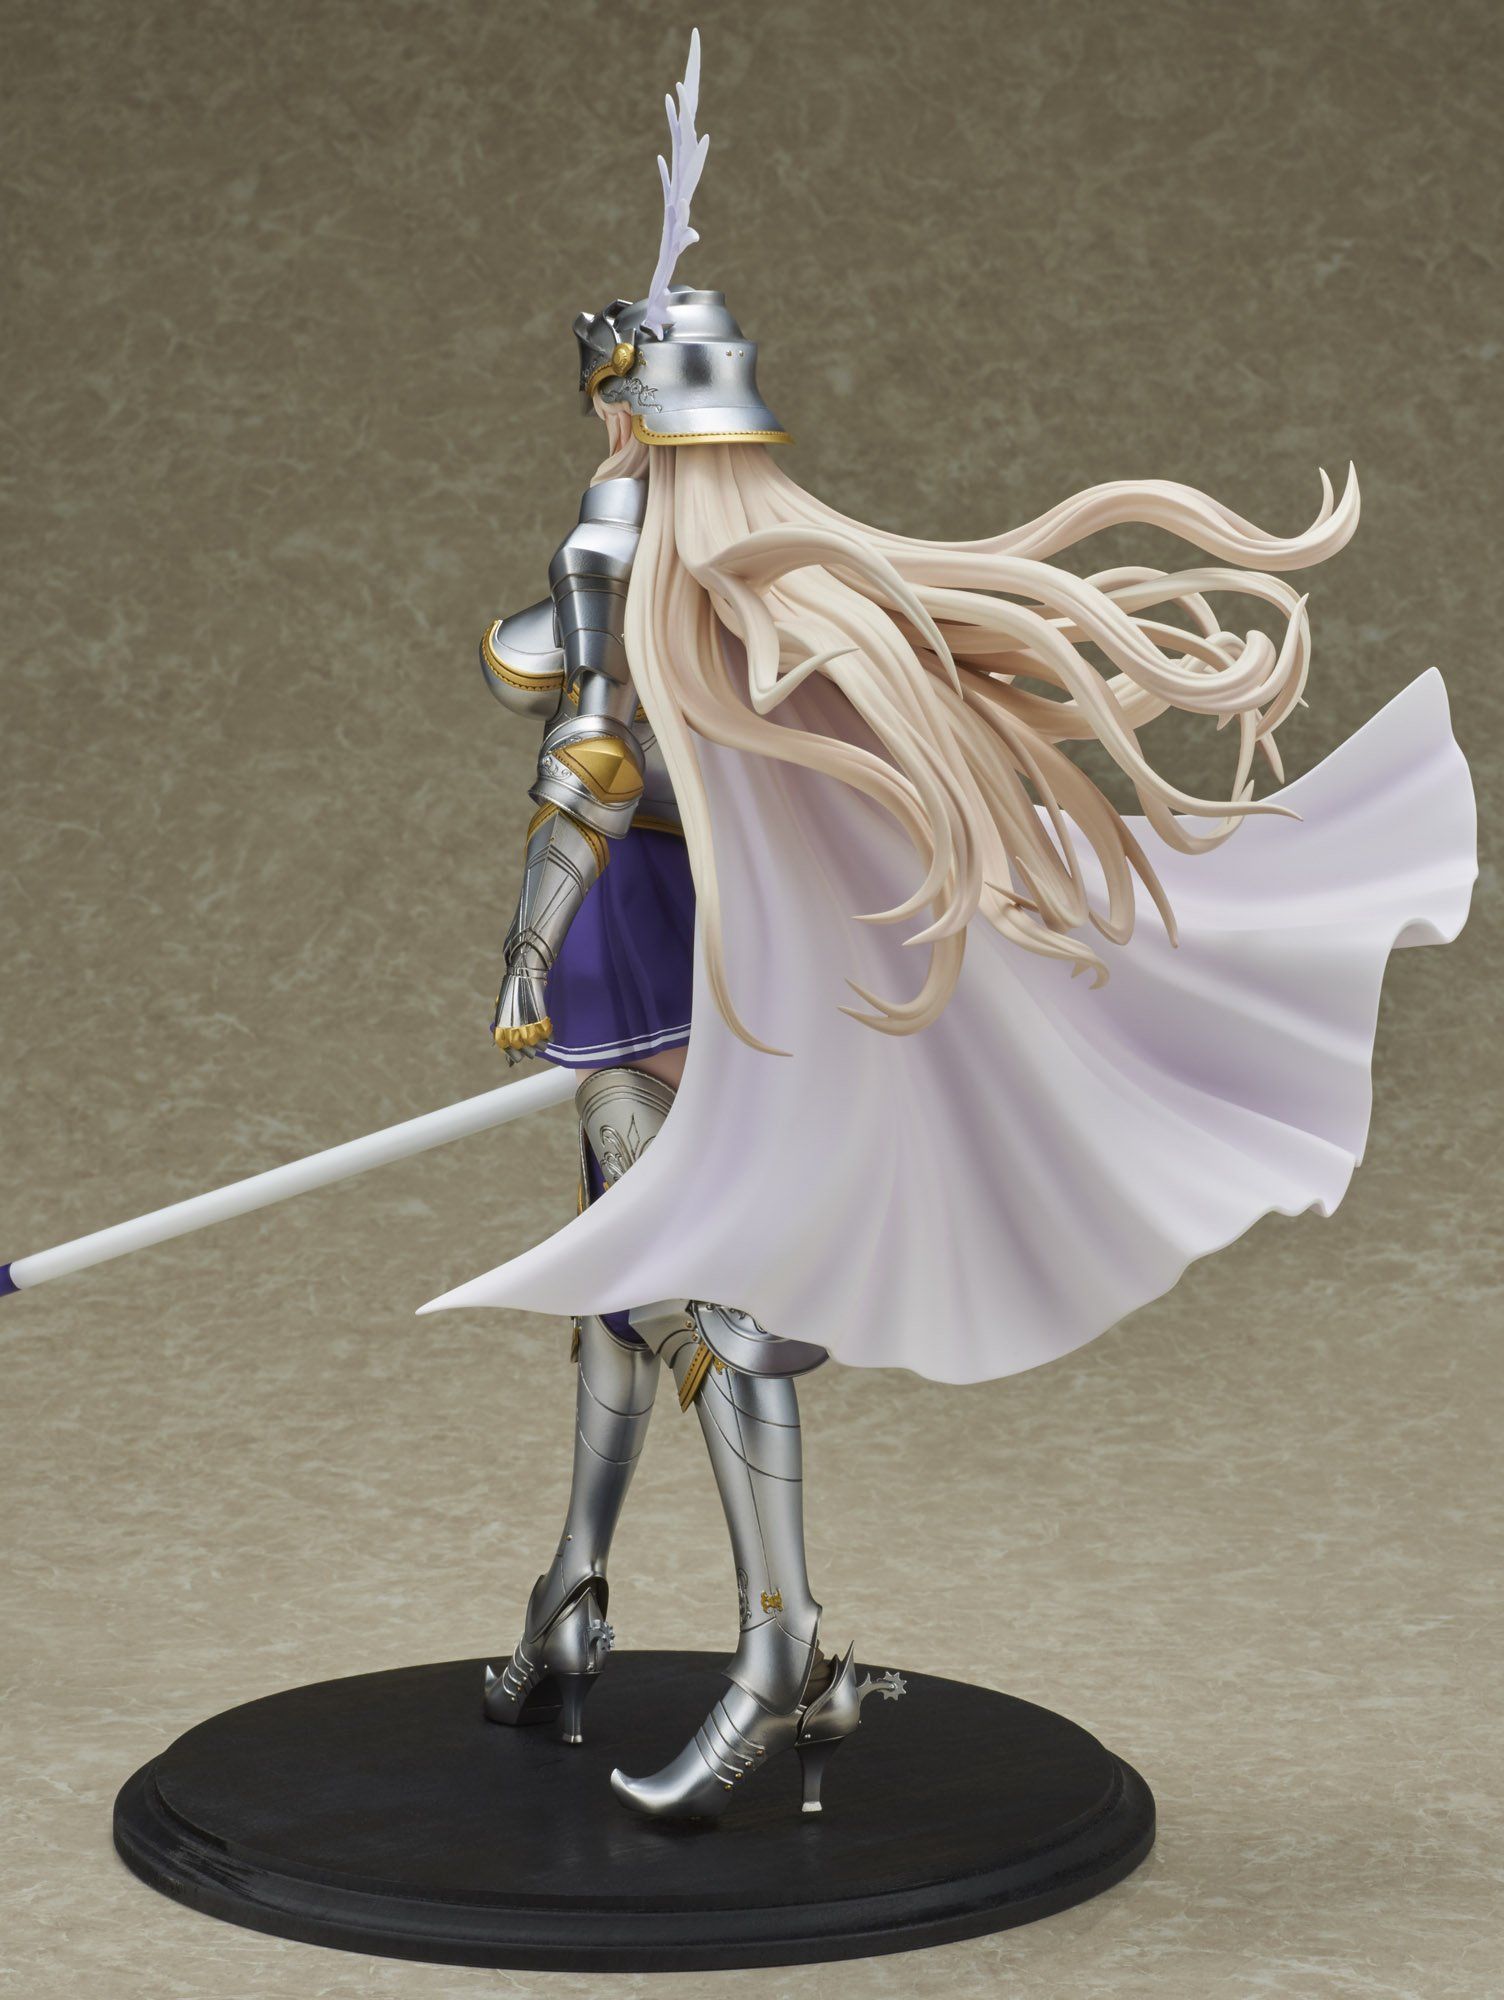 Dragon Toy Walkure Romanze: Celia Cumani Aintree PVC Figure (1:6 Scale) Online in El Salvador. dragon toy Products in El Salvador Prices, Reviews and Free Delivery over US$70.00